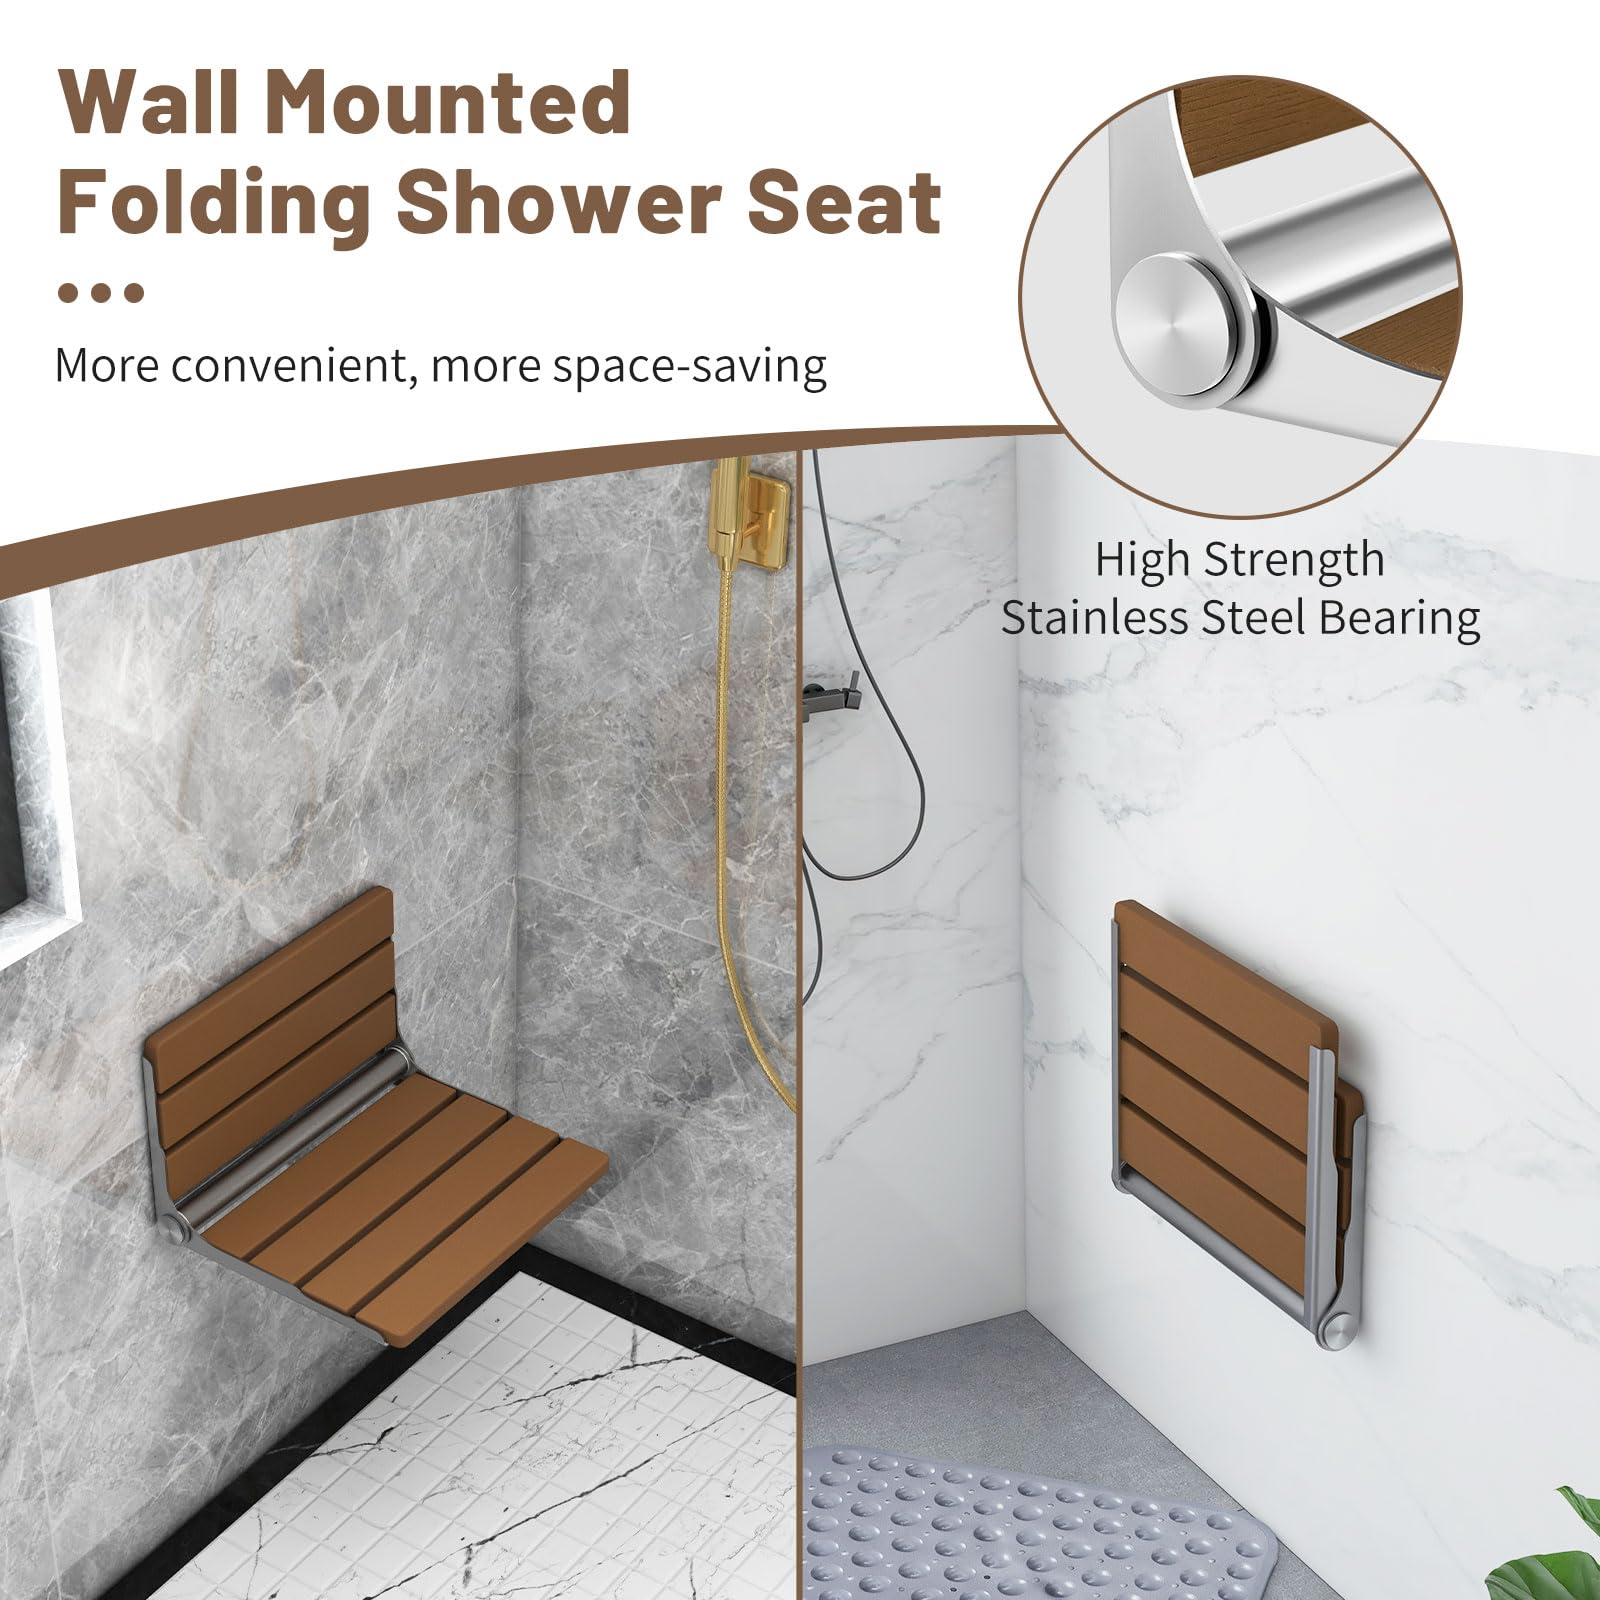 Giantex Folding Shower Seat Wall Mounted, Home Care Foldable Shower Stool for Inside Shower Waterproof